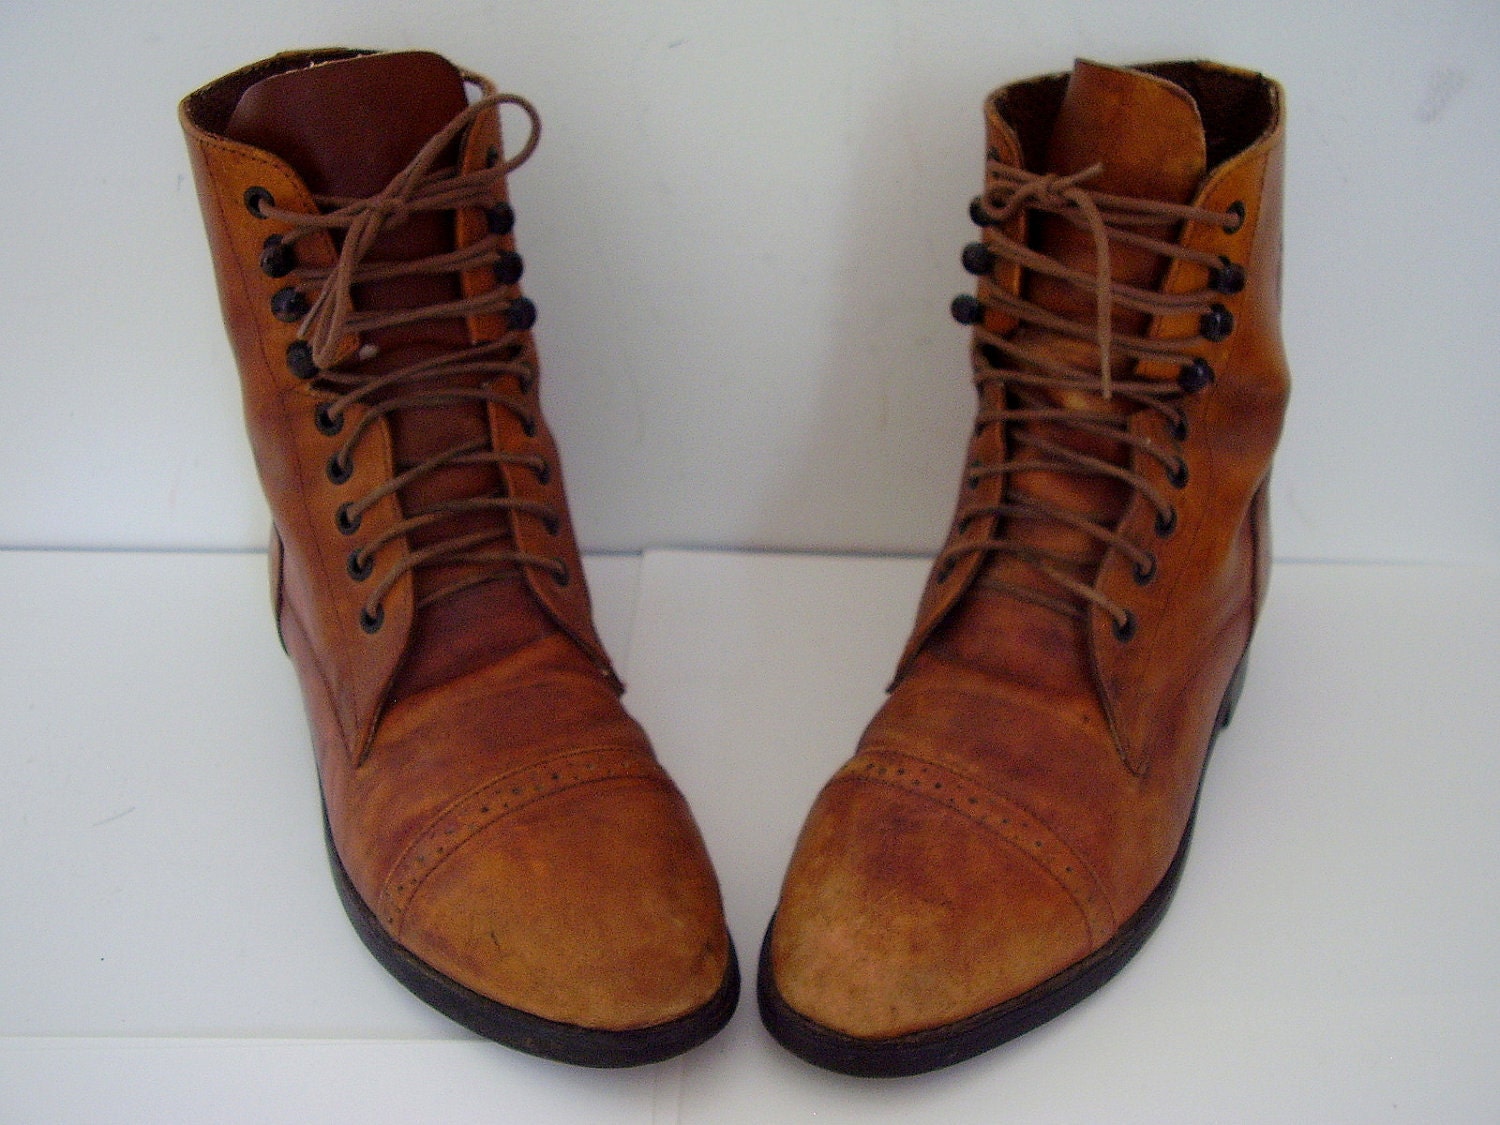 Lace Up Riding Boots by On Course Distressed Brown Leather